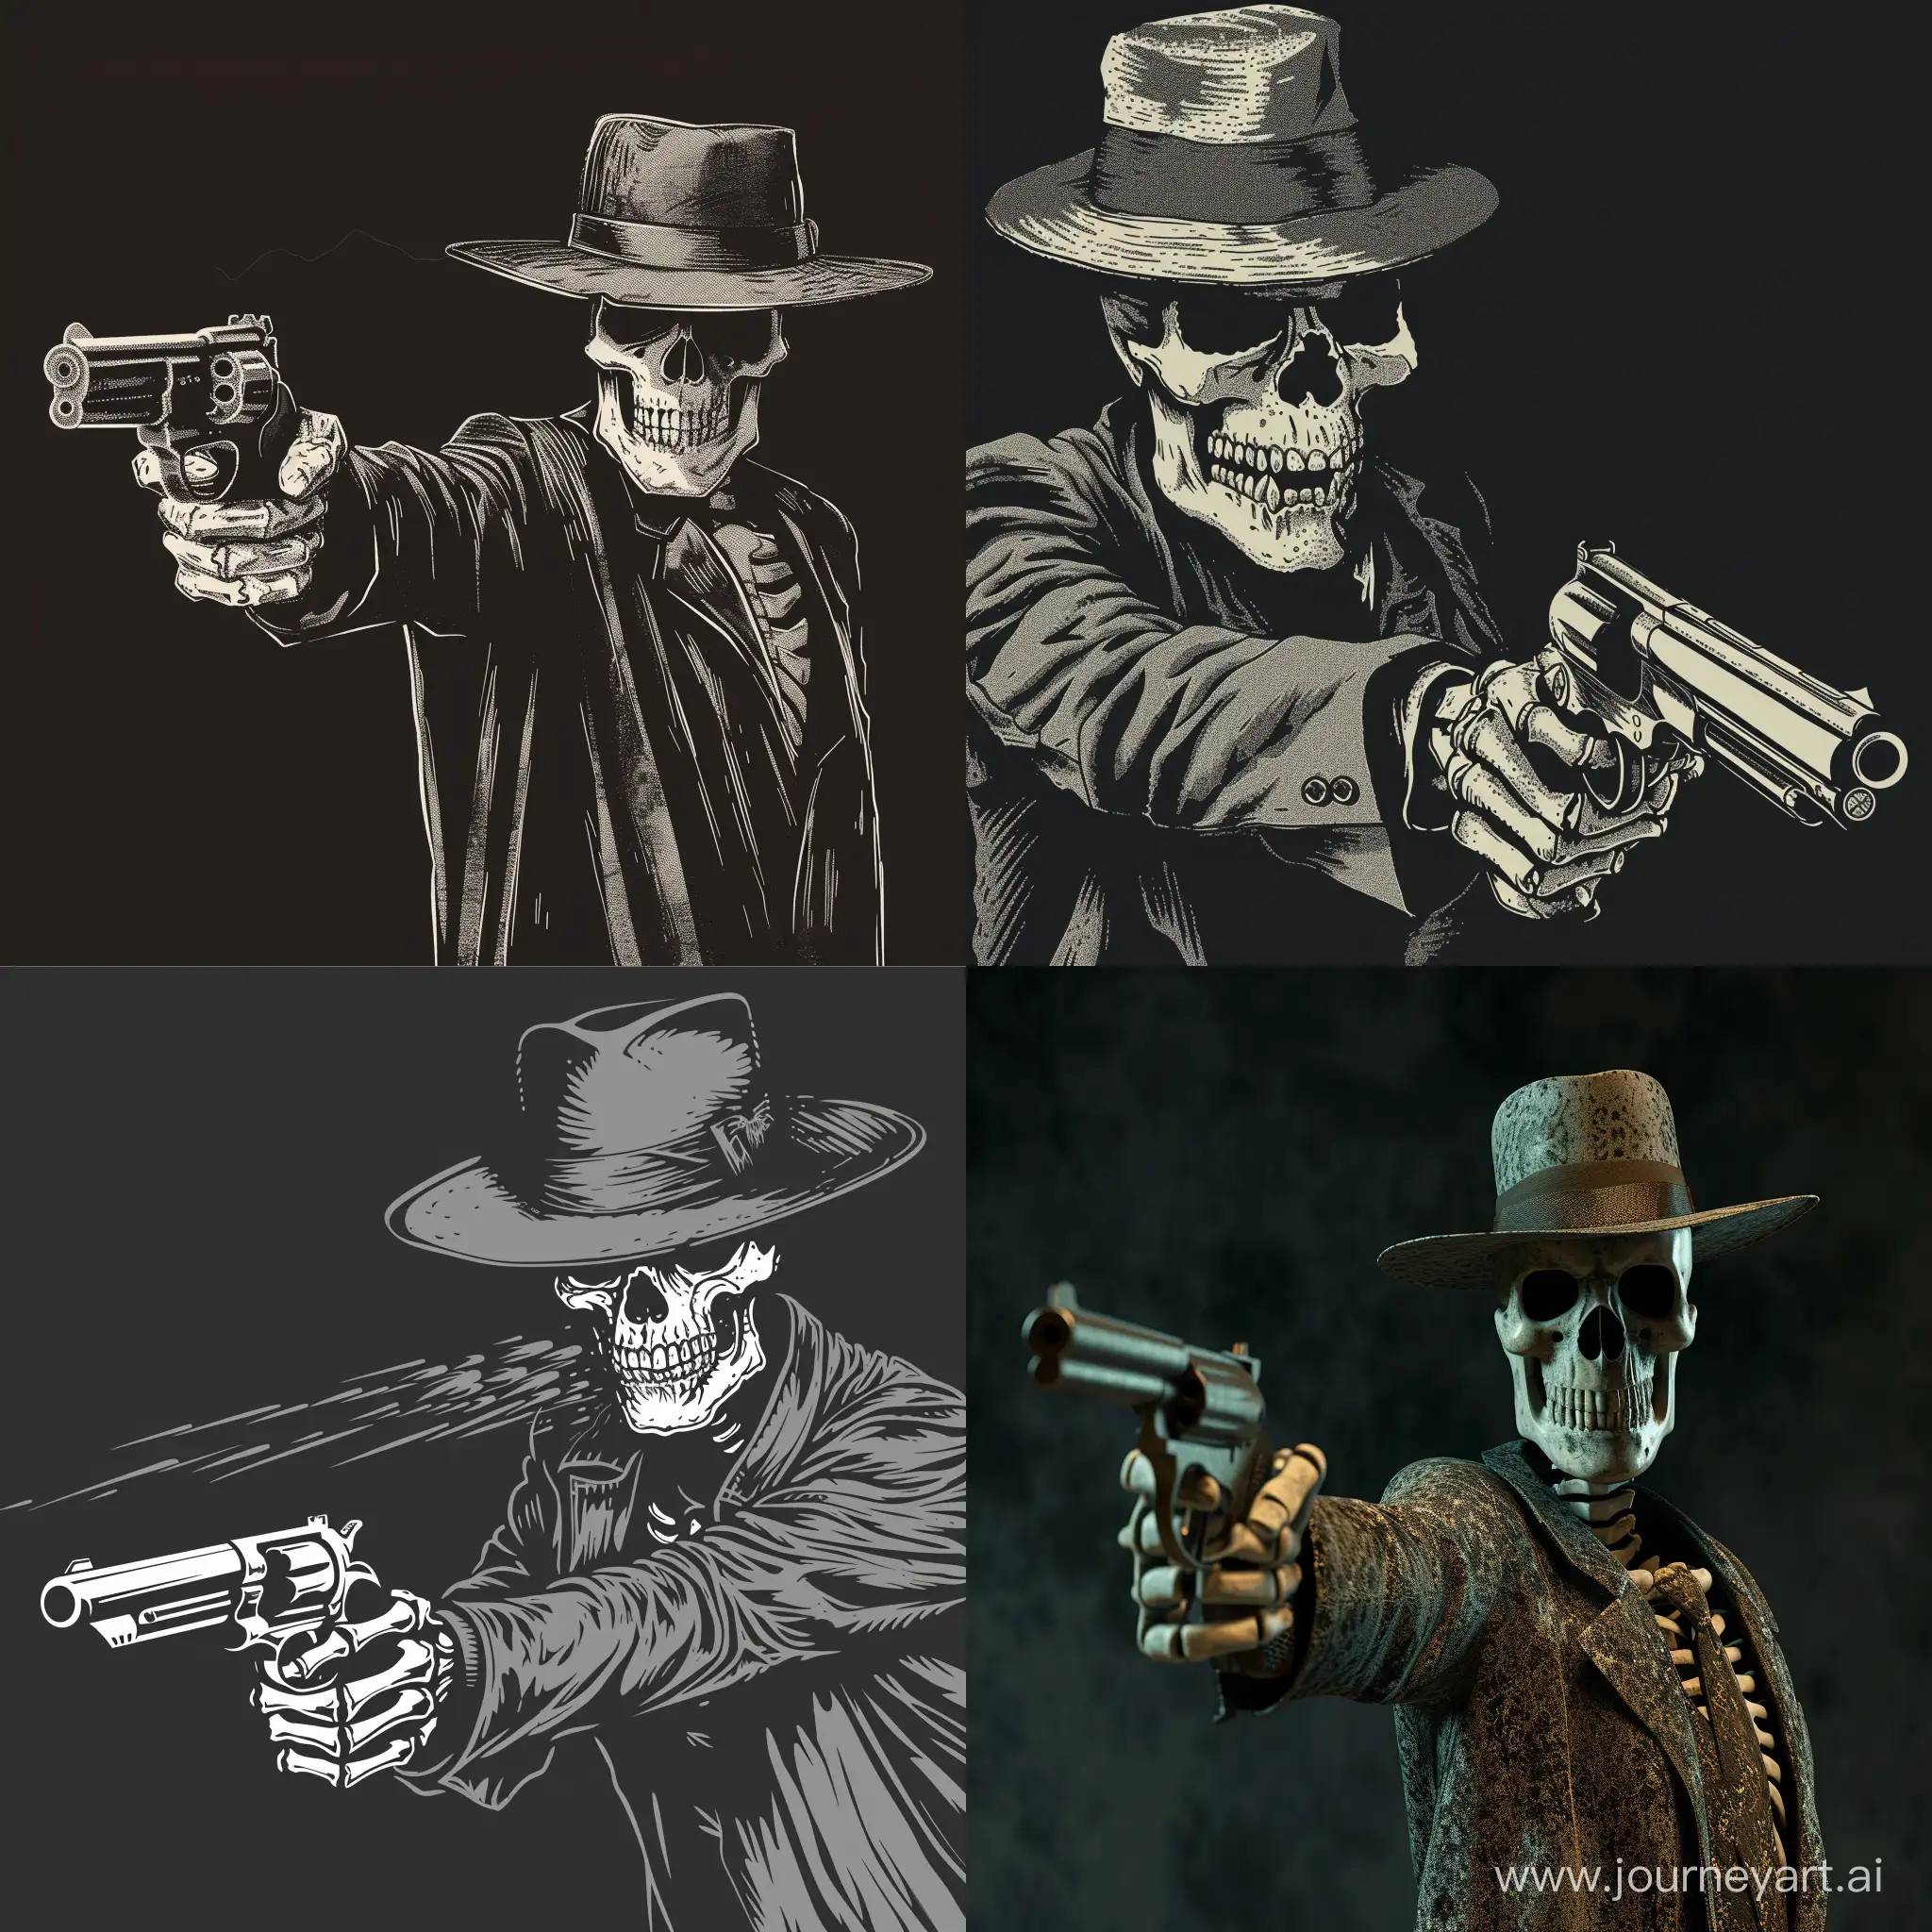 Skeleton mafia boss with a gun and a hat